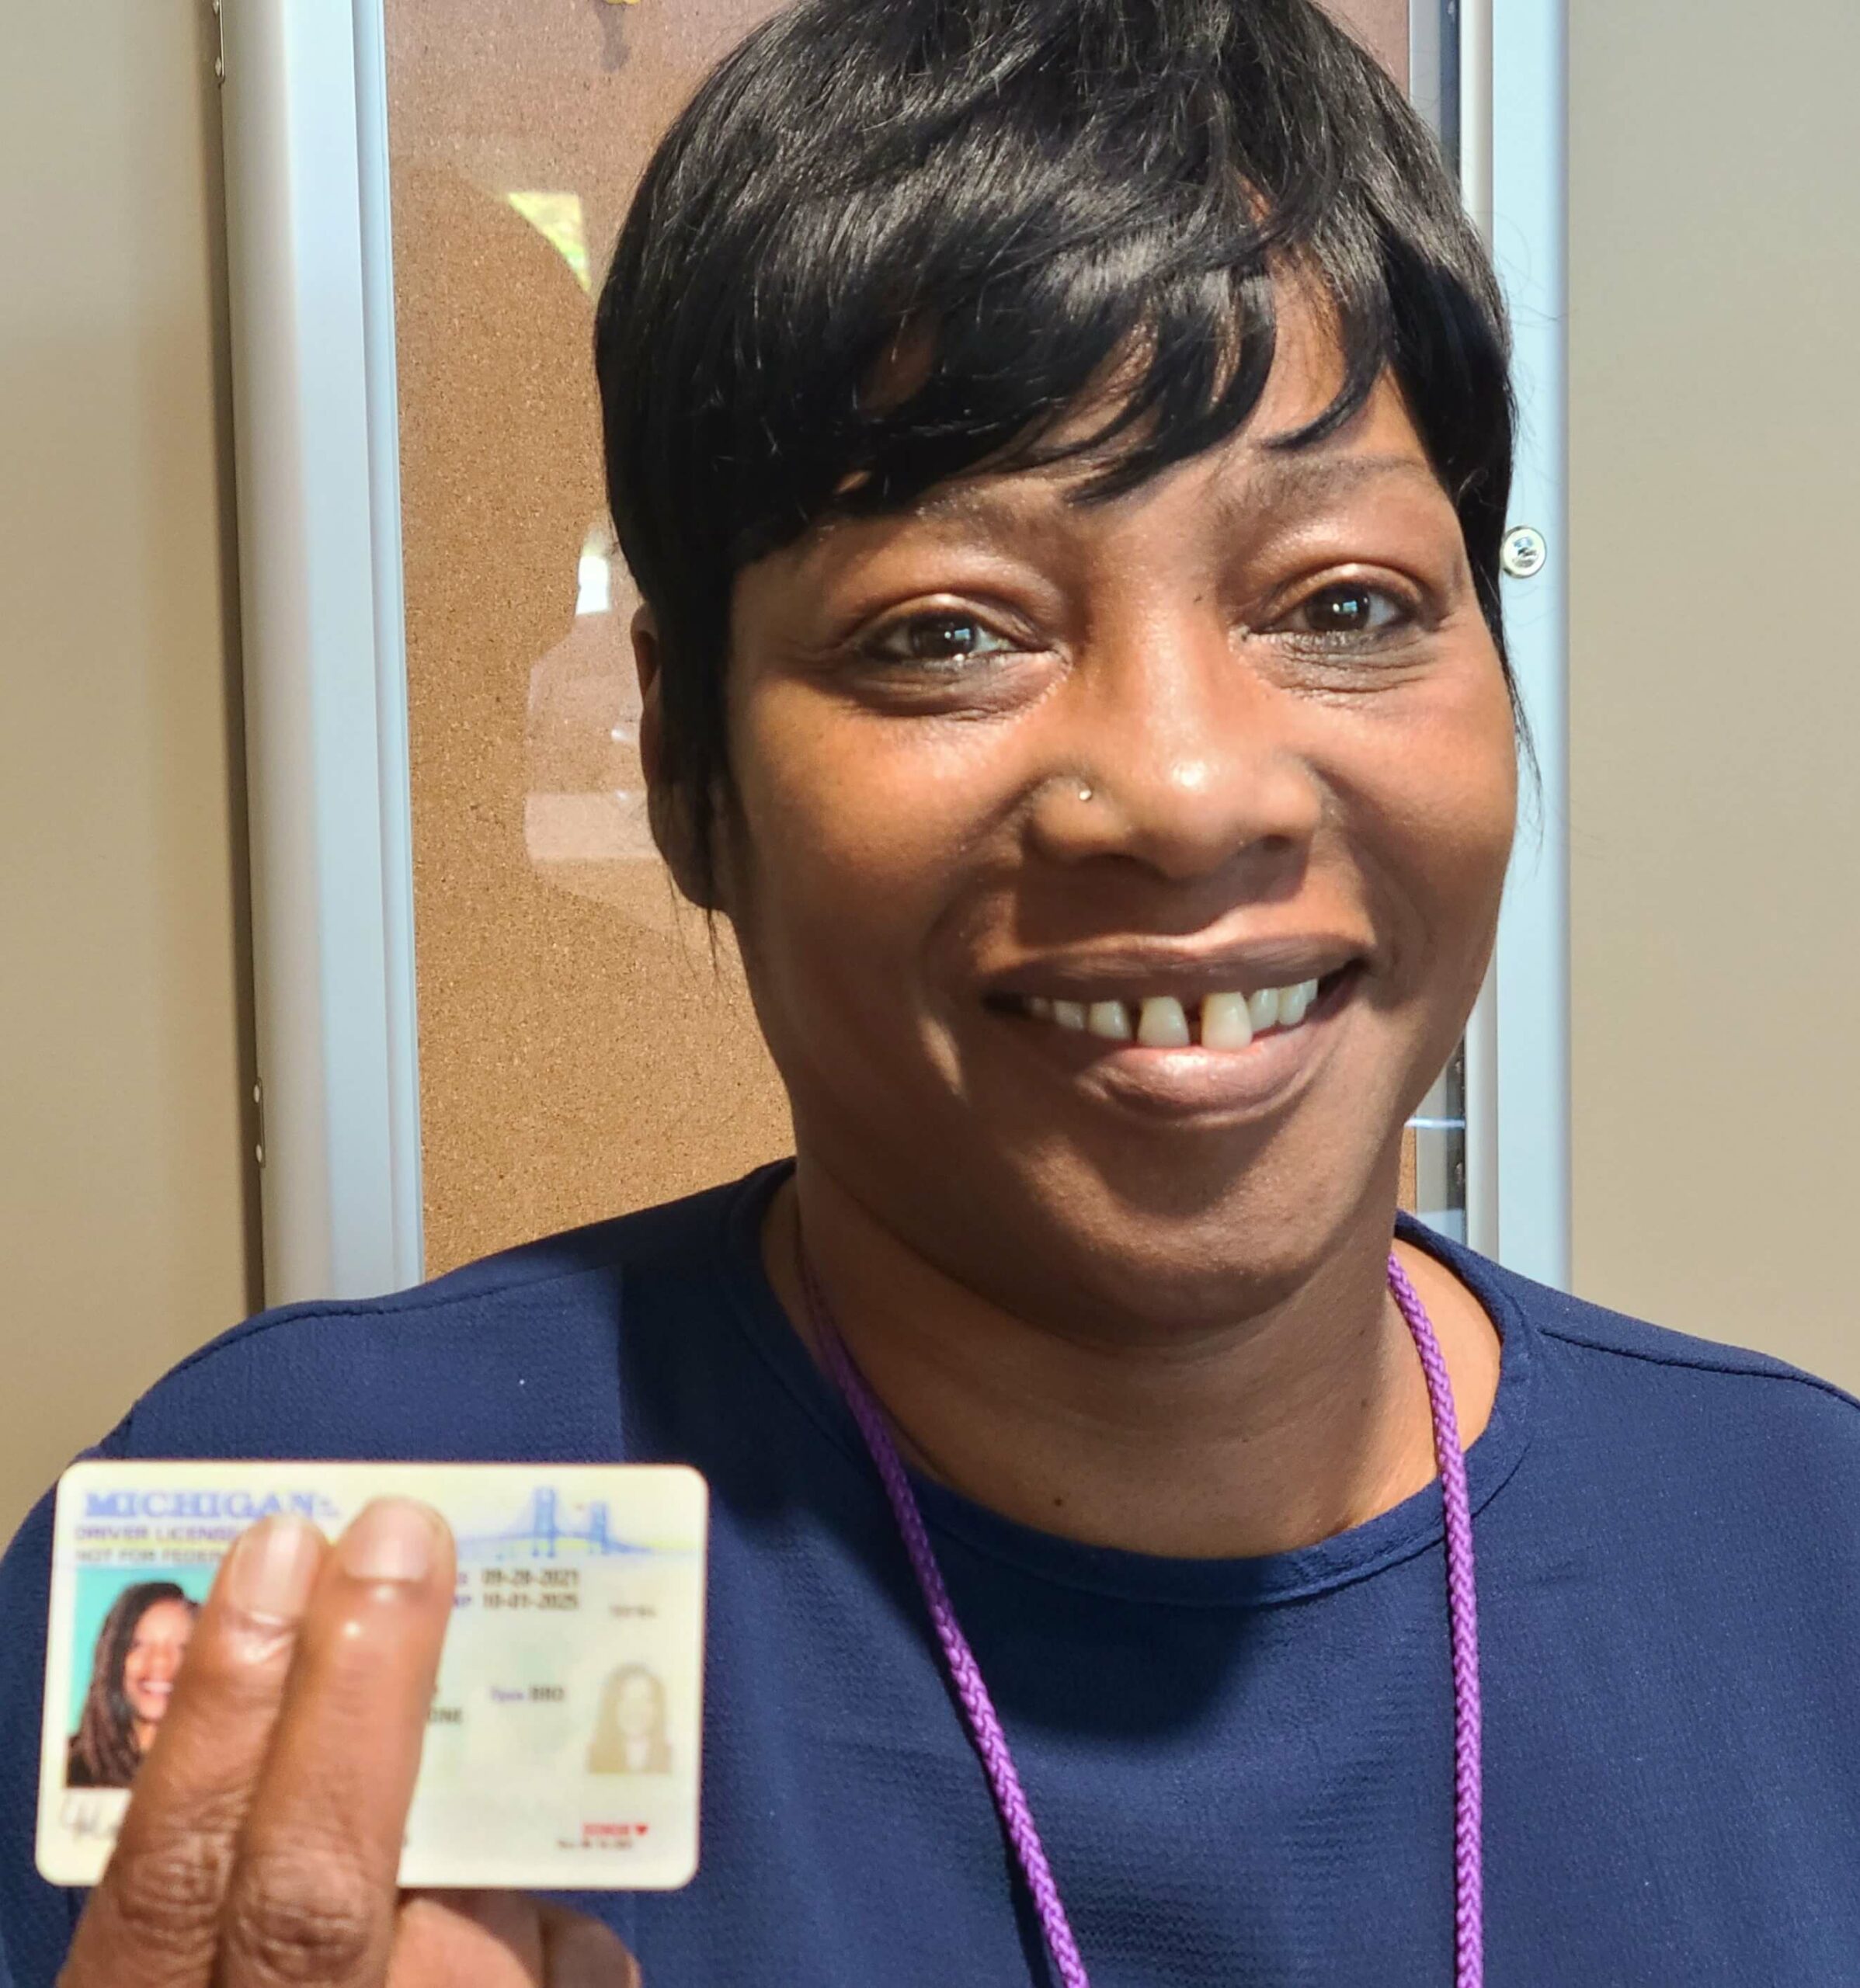 Black woman holding up driver's license, showing donor heart symbol